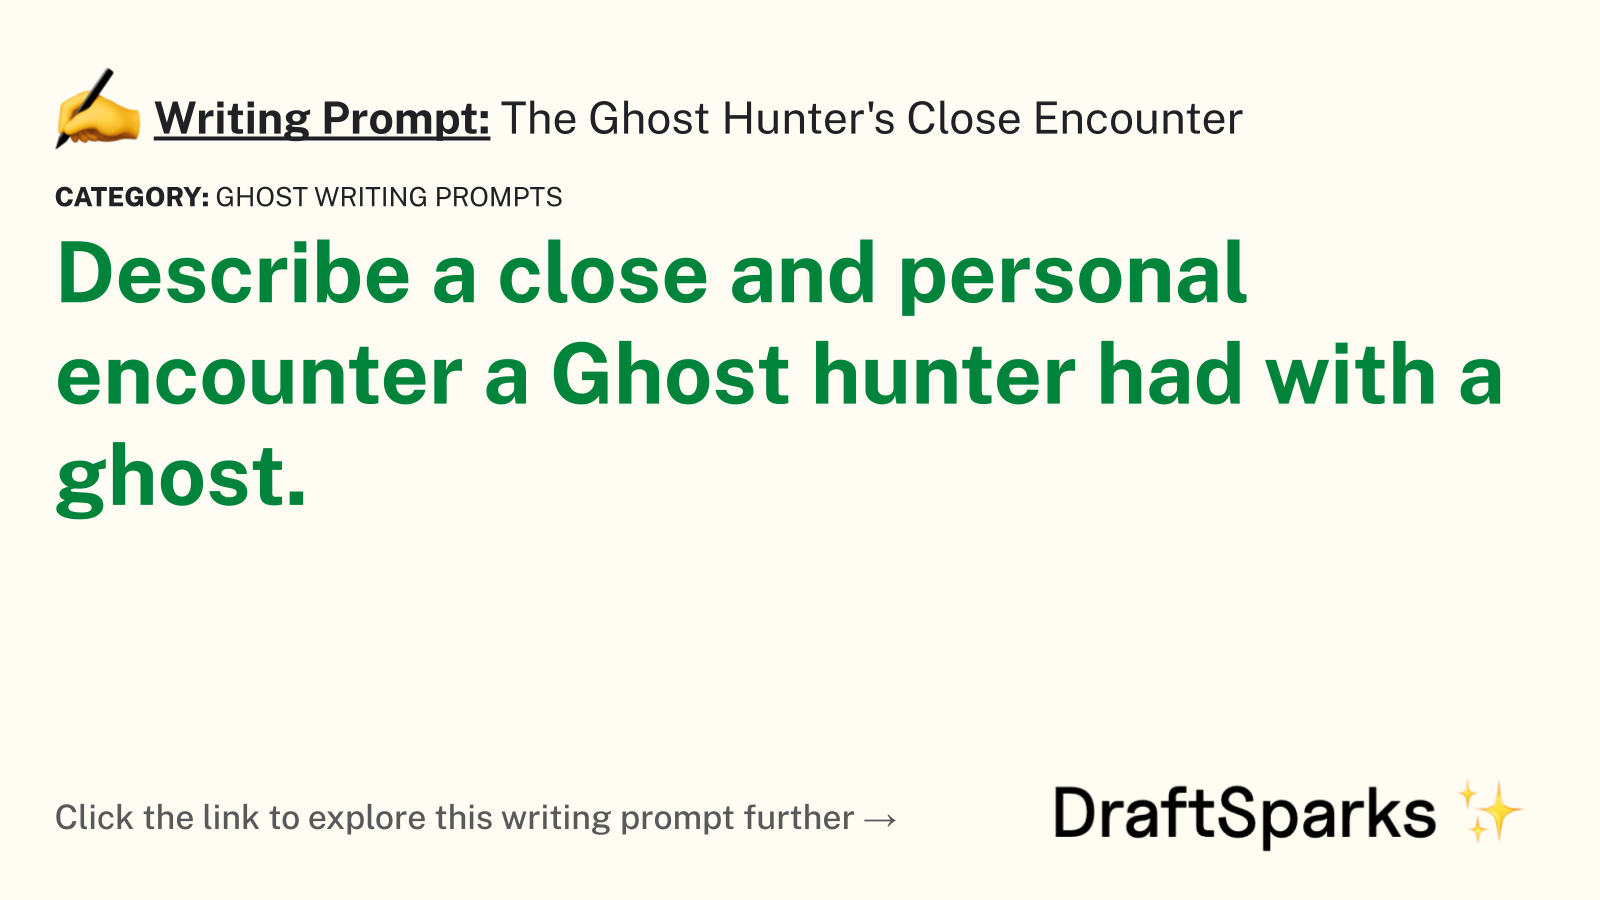 The Ghost Hunter’s Close Encounter